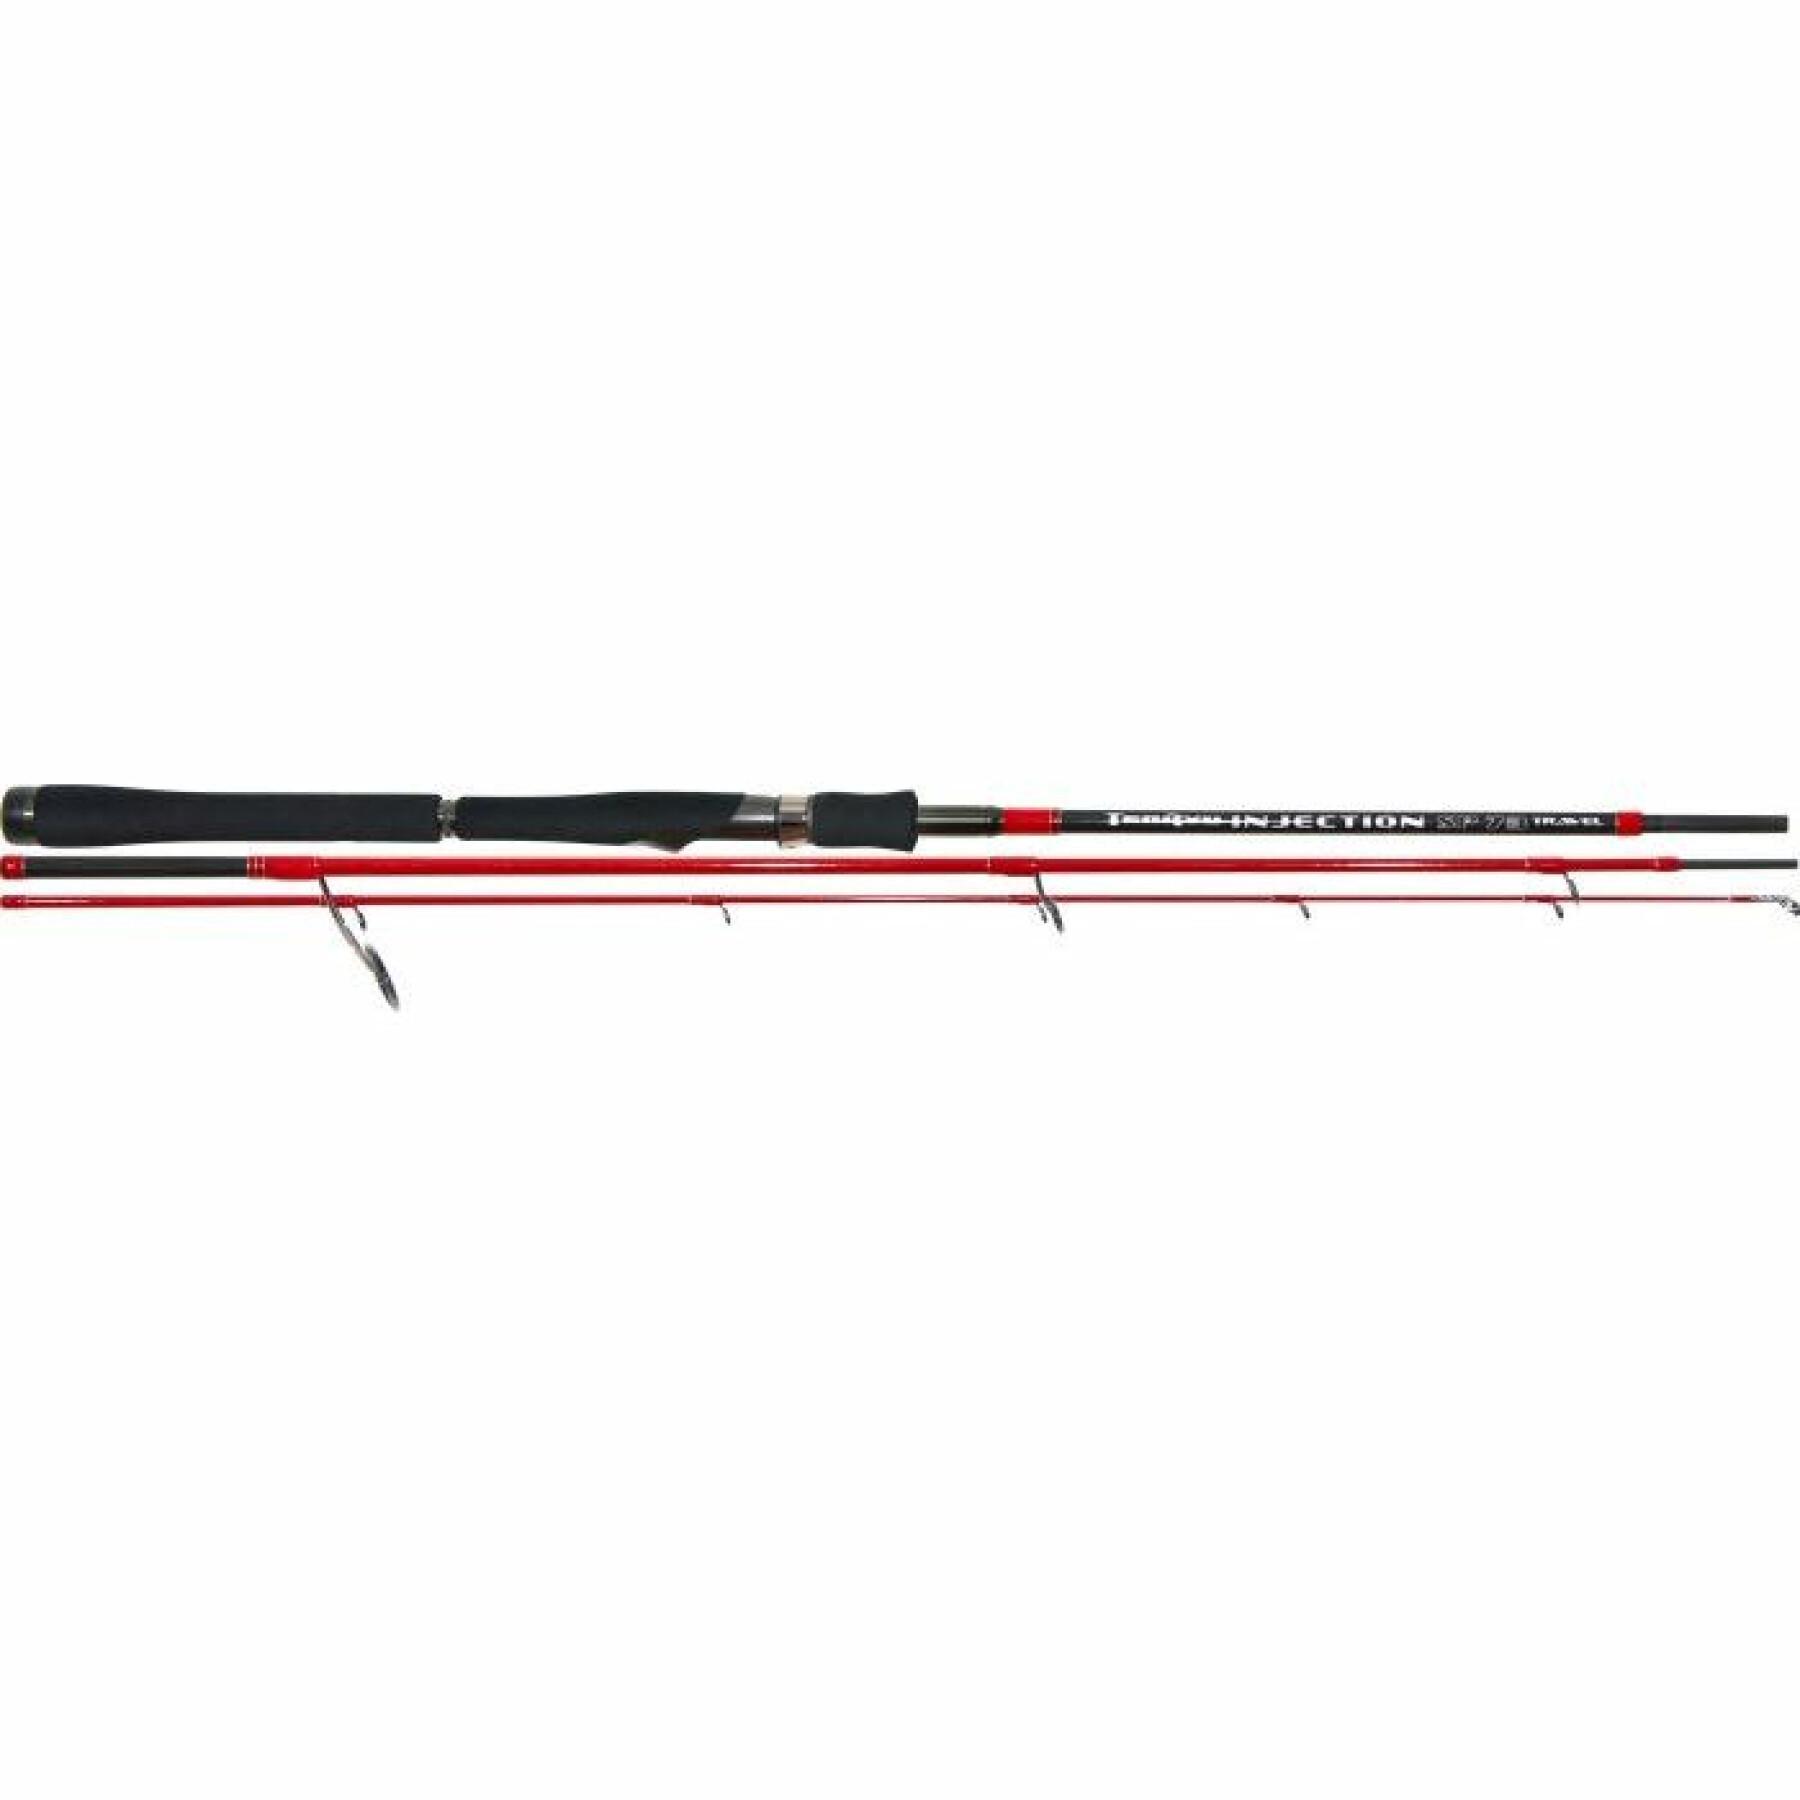 Spinning rod Tenryu Injection SP 73M Travel 5-28g